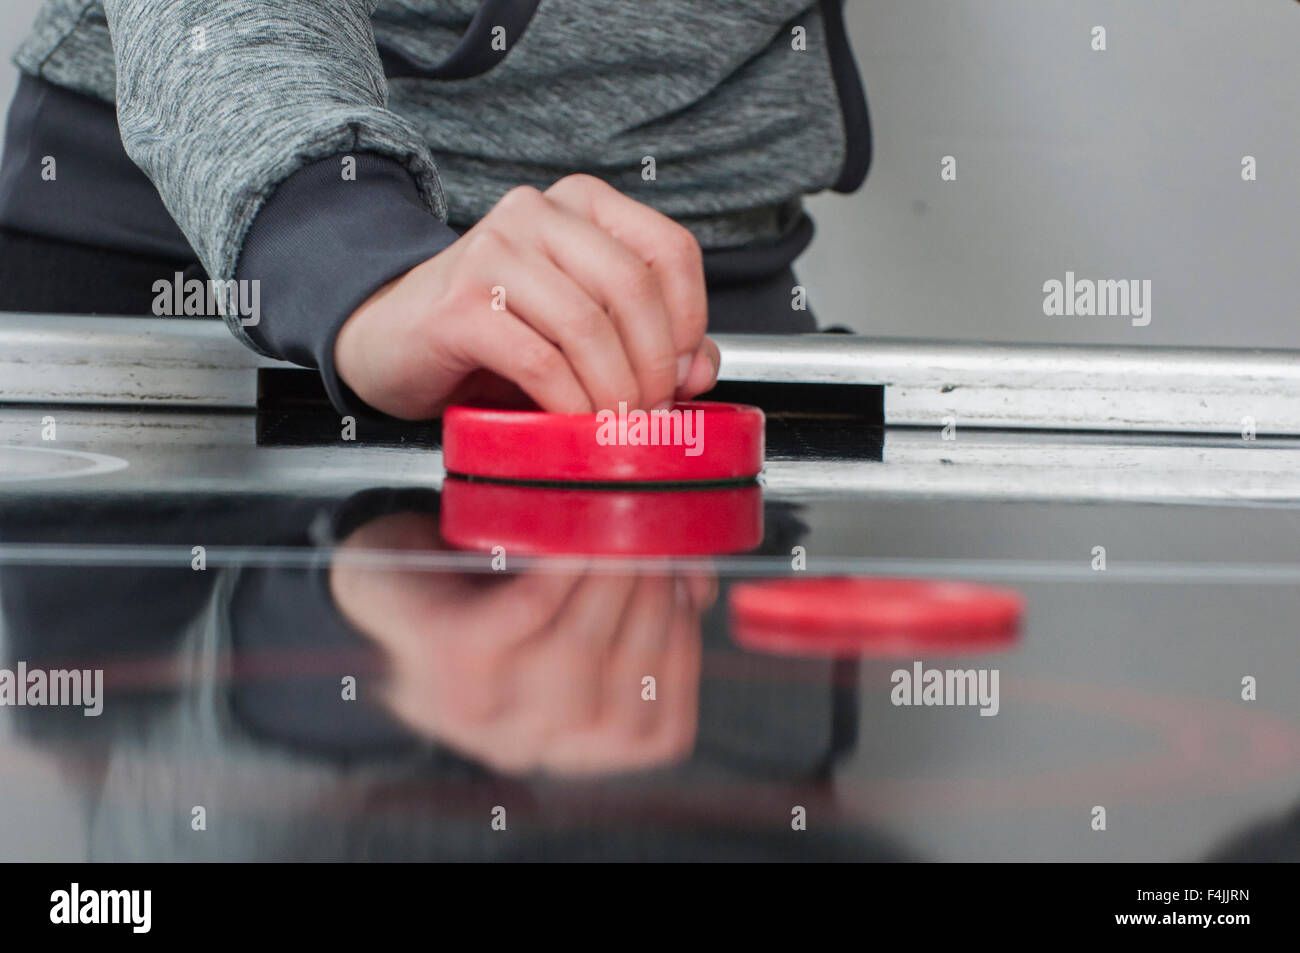 A young girl playing in a hockey games table. Stock Photo